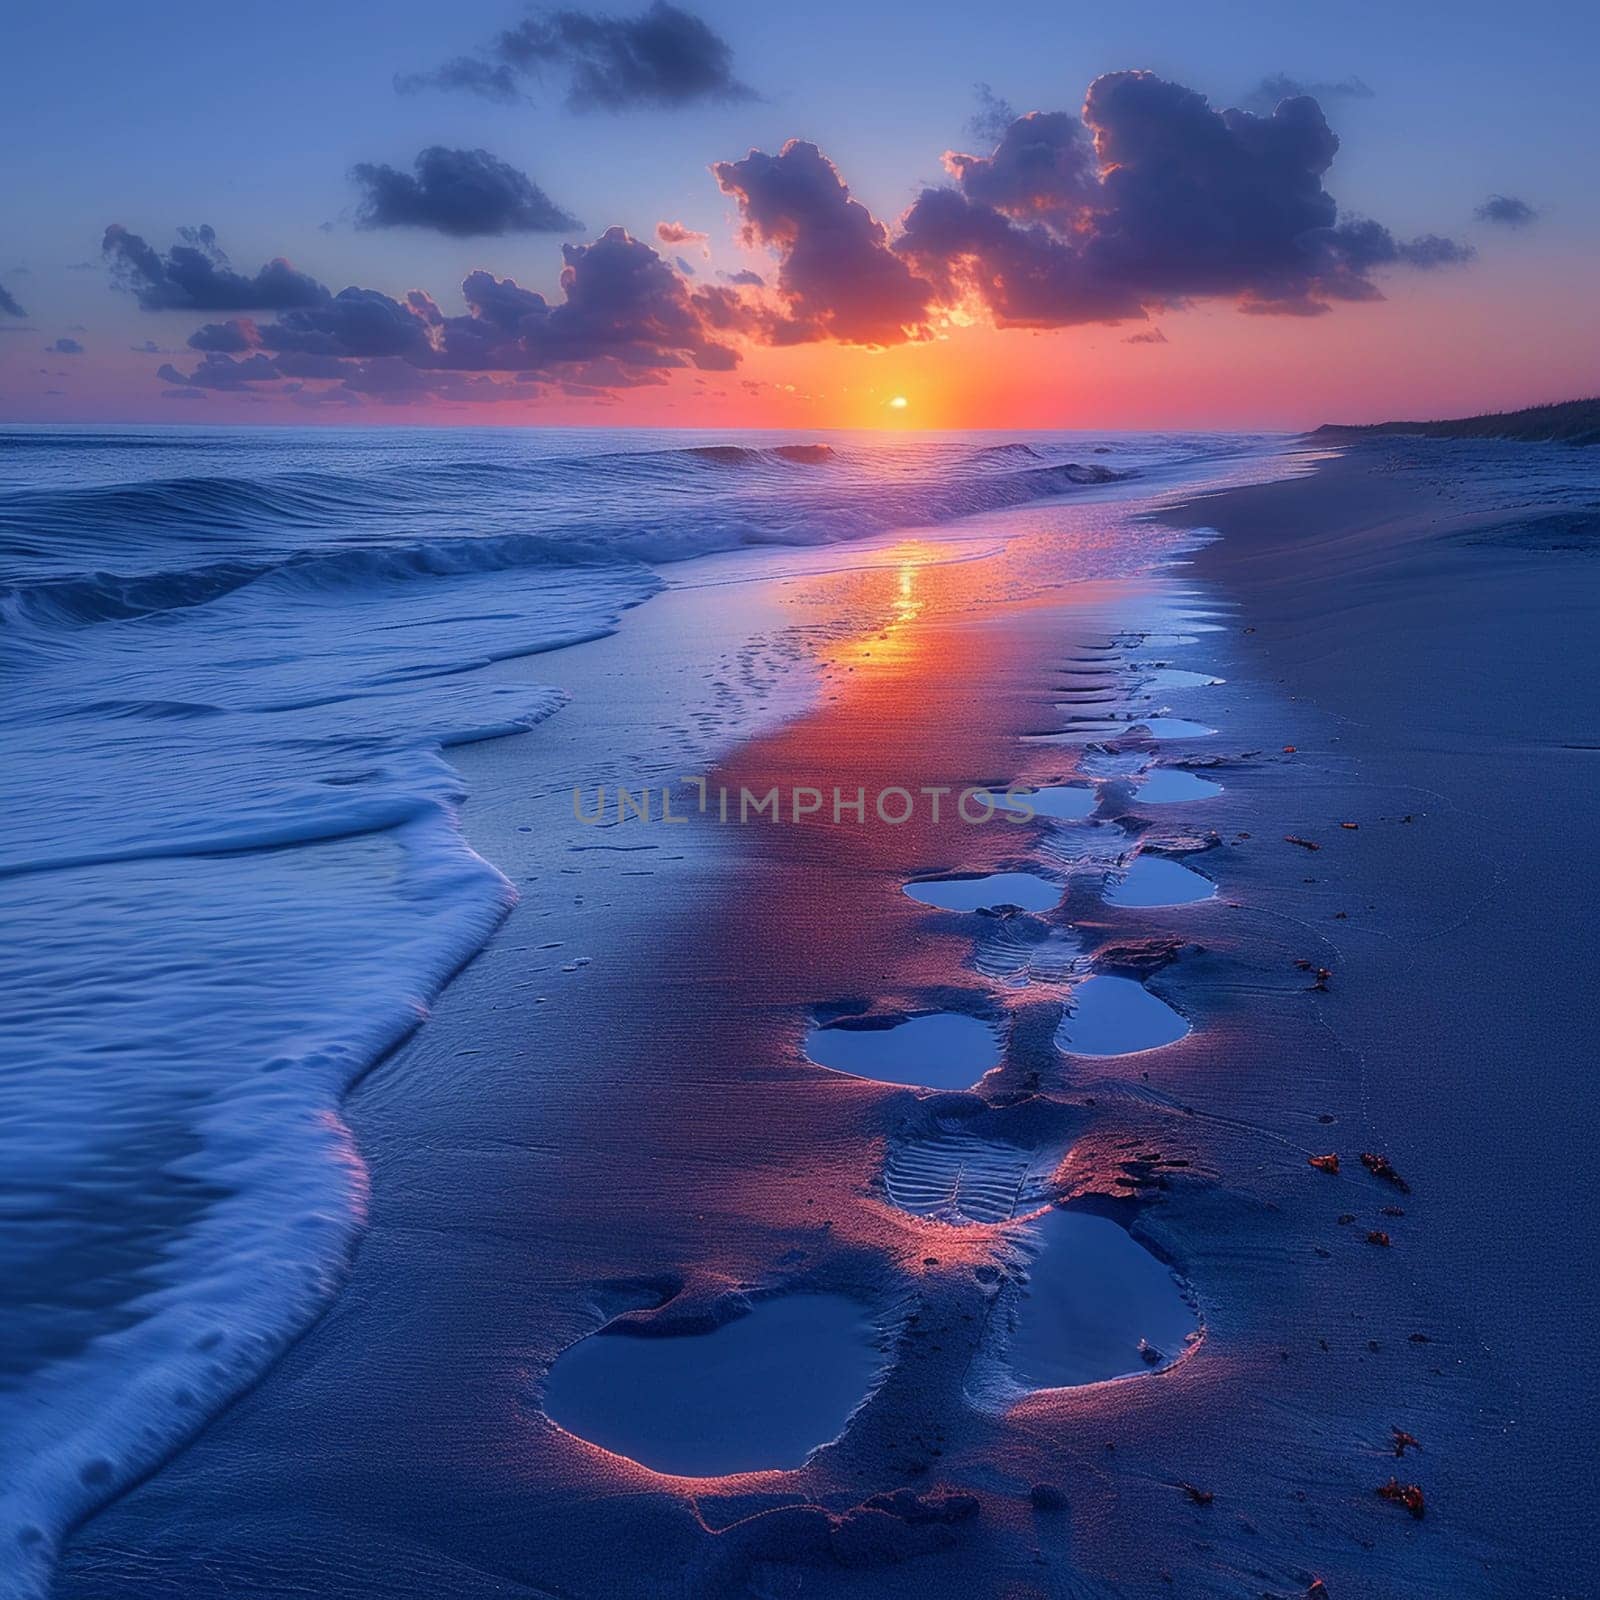 Gentle footprints in the sand leading towards the ocean, symbolizing journey and exploration.